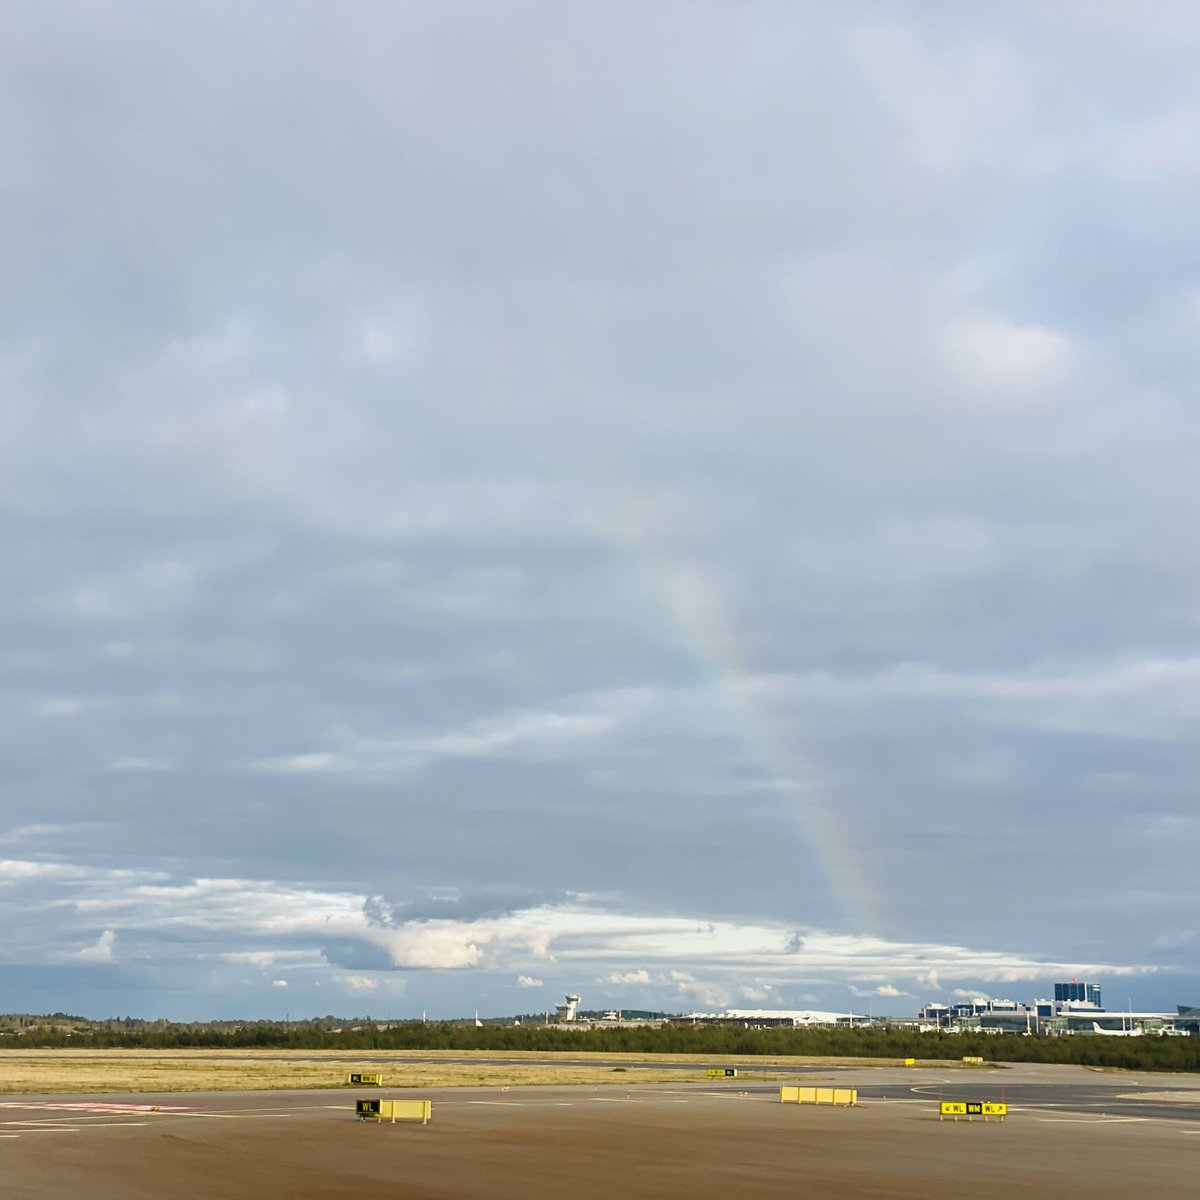 RT @silke4senate: Landed in Helsinki and were greeted by a rainbow. https://t.co/C7sVZkVqpY